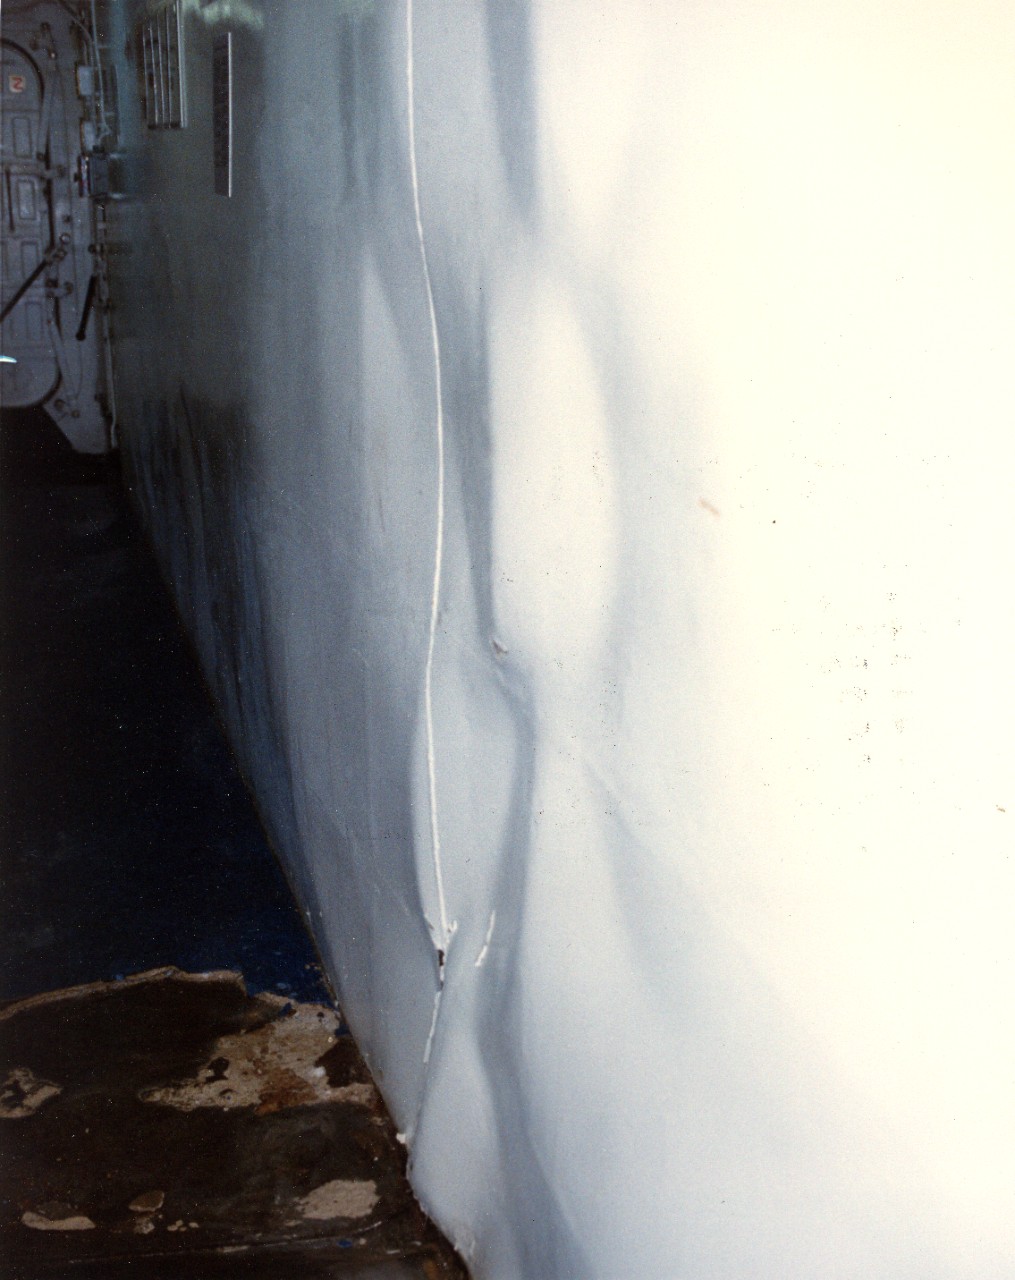 A close-up view of buckling in a bulkhead aboard the USS Samuel B. Roberts (FFG-58) after the ship struck a mine in the Persian Gulf on April 14, 1988.